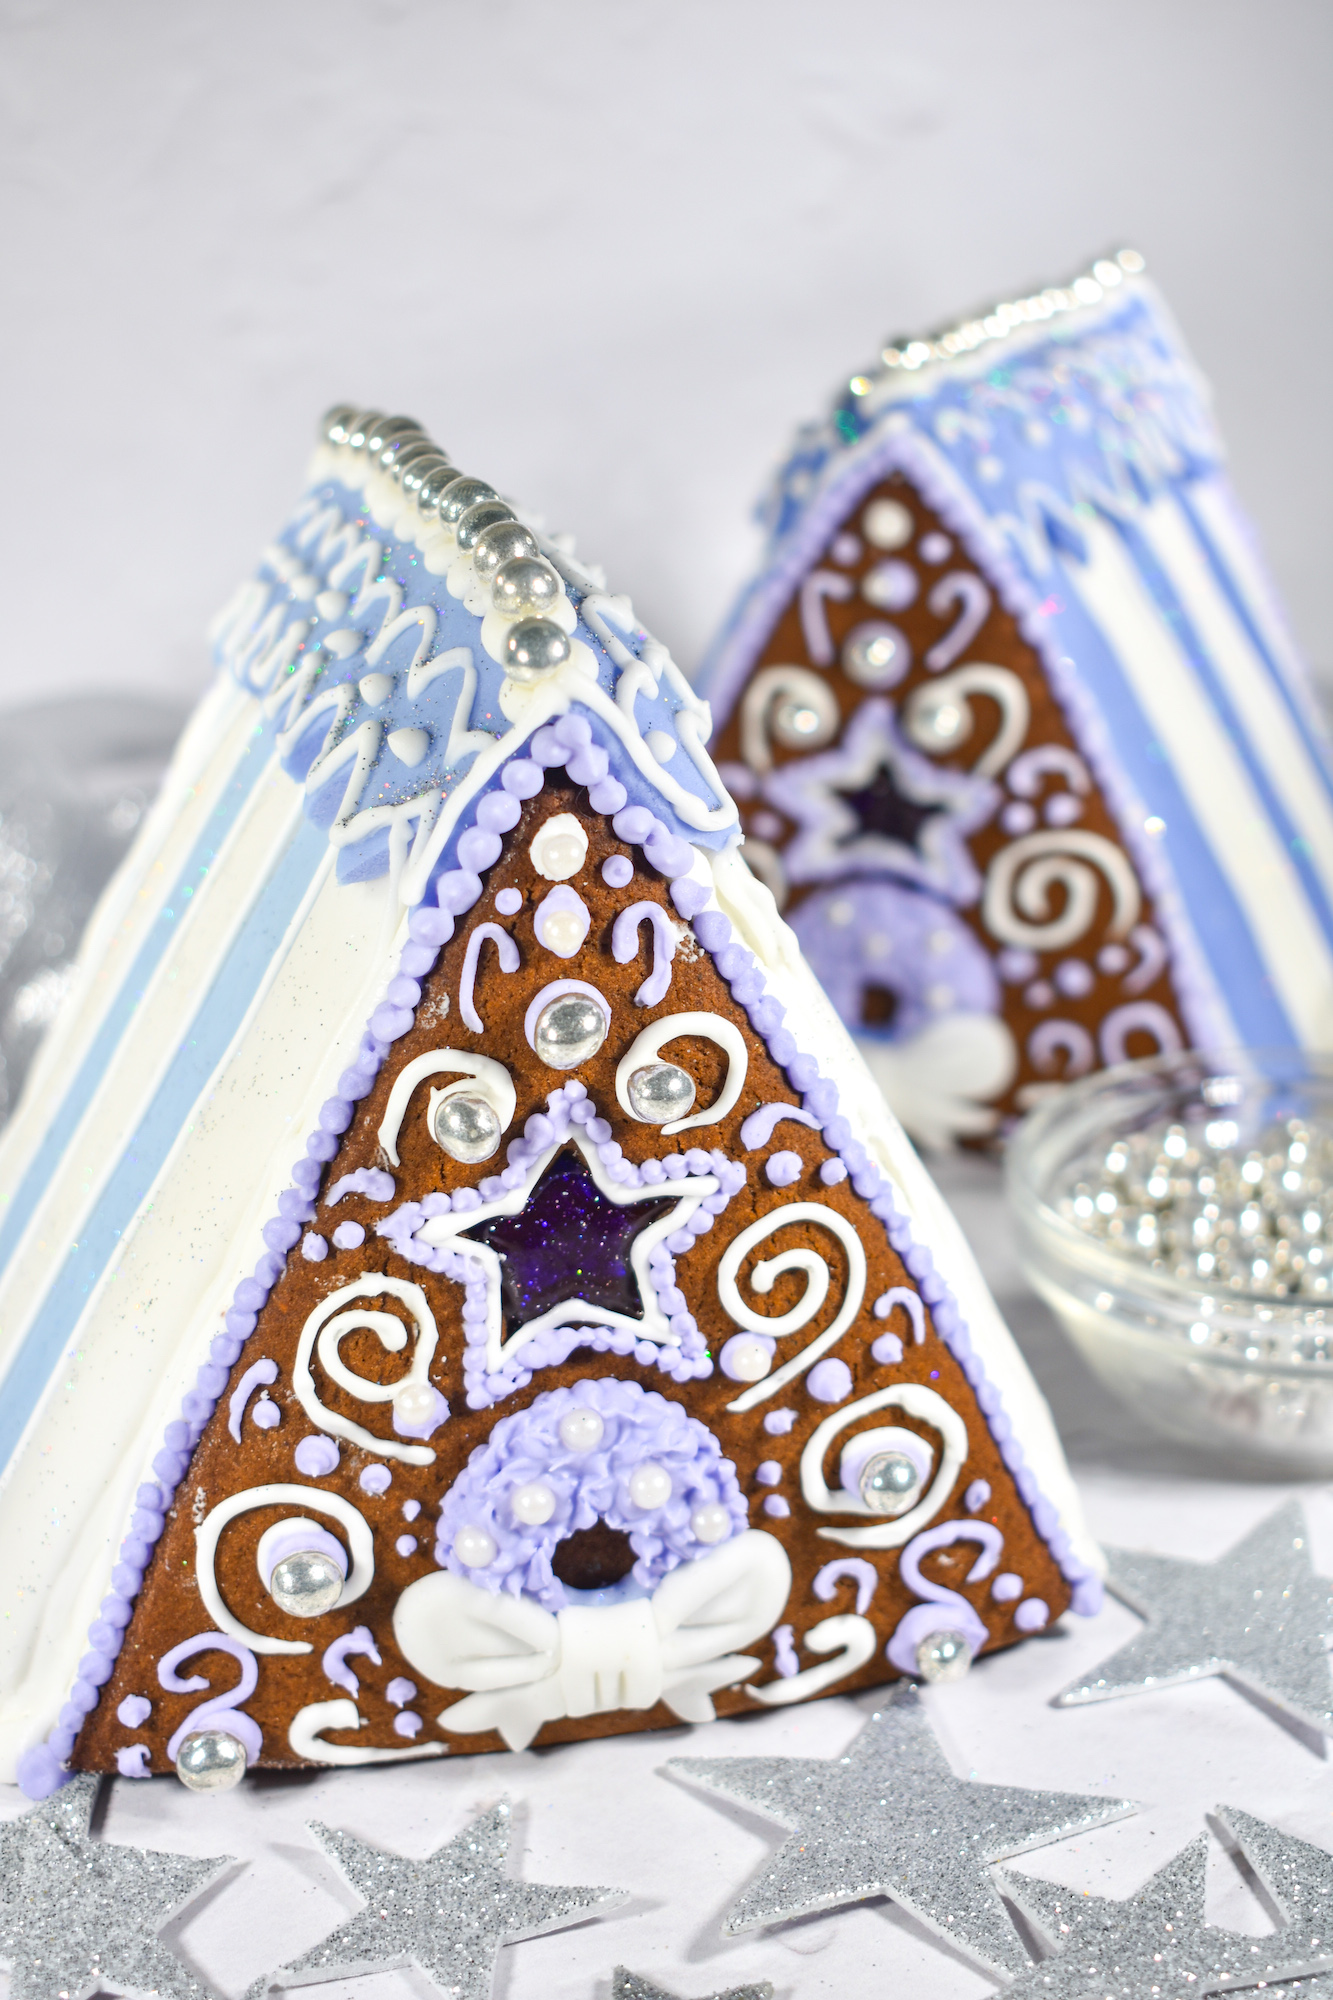 Gingerbread houses on a white surface